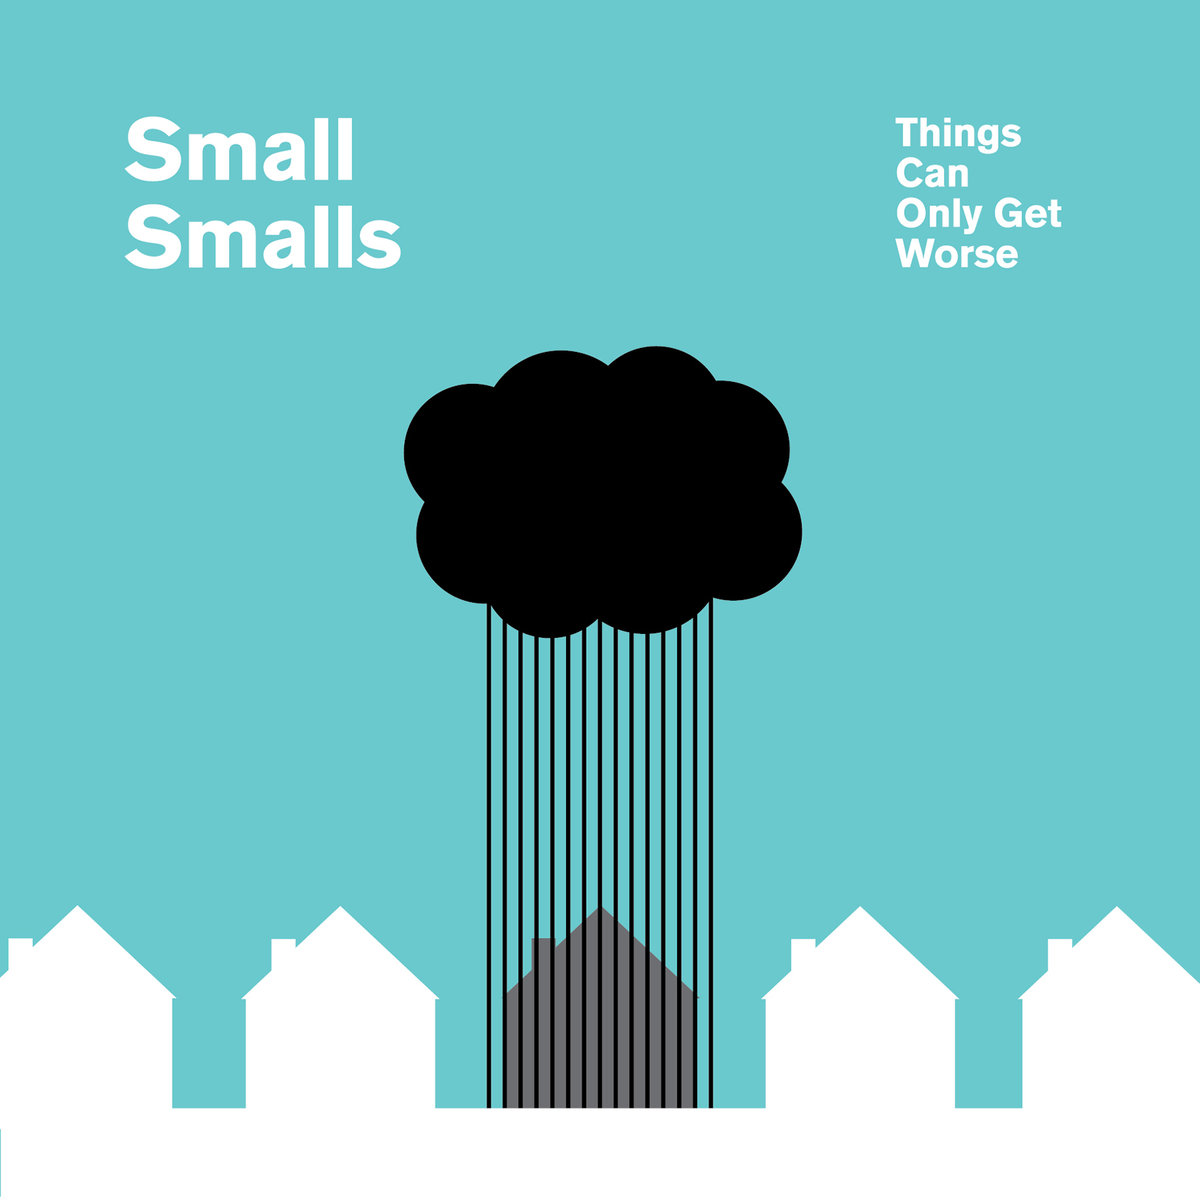 Small Smalls – Things Can Only Get Worse